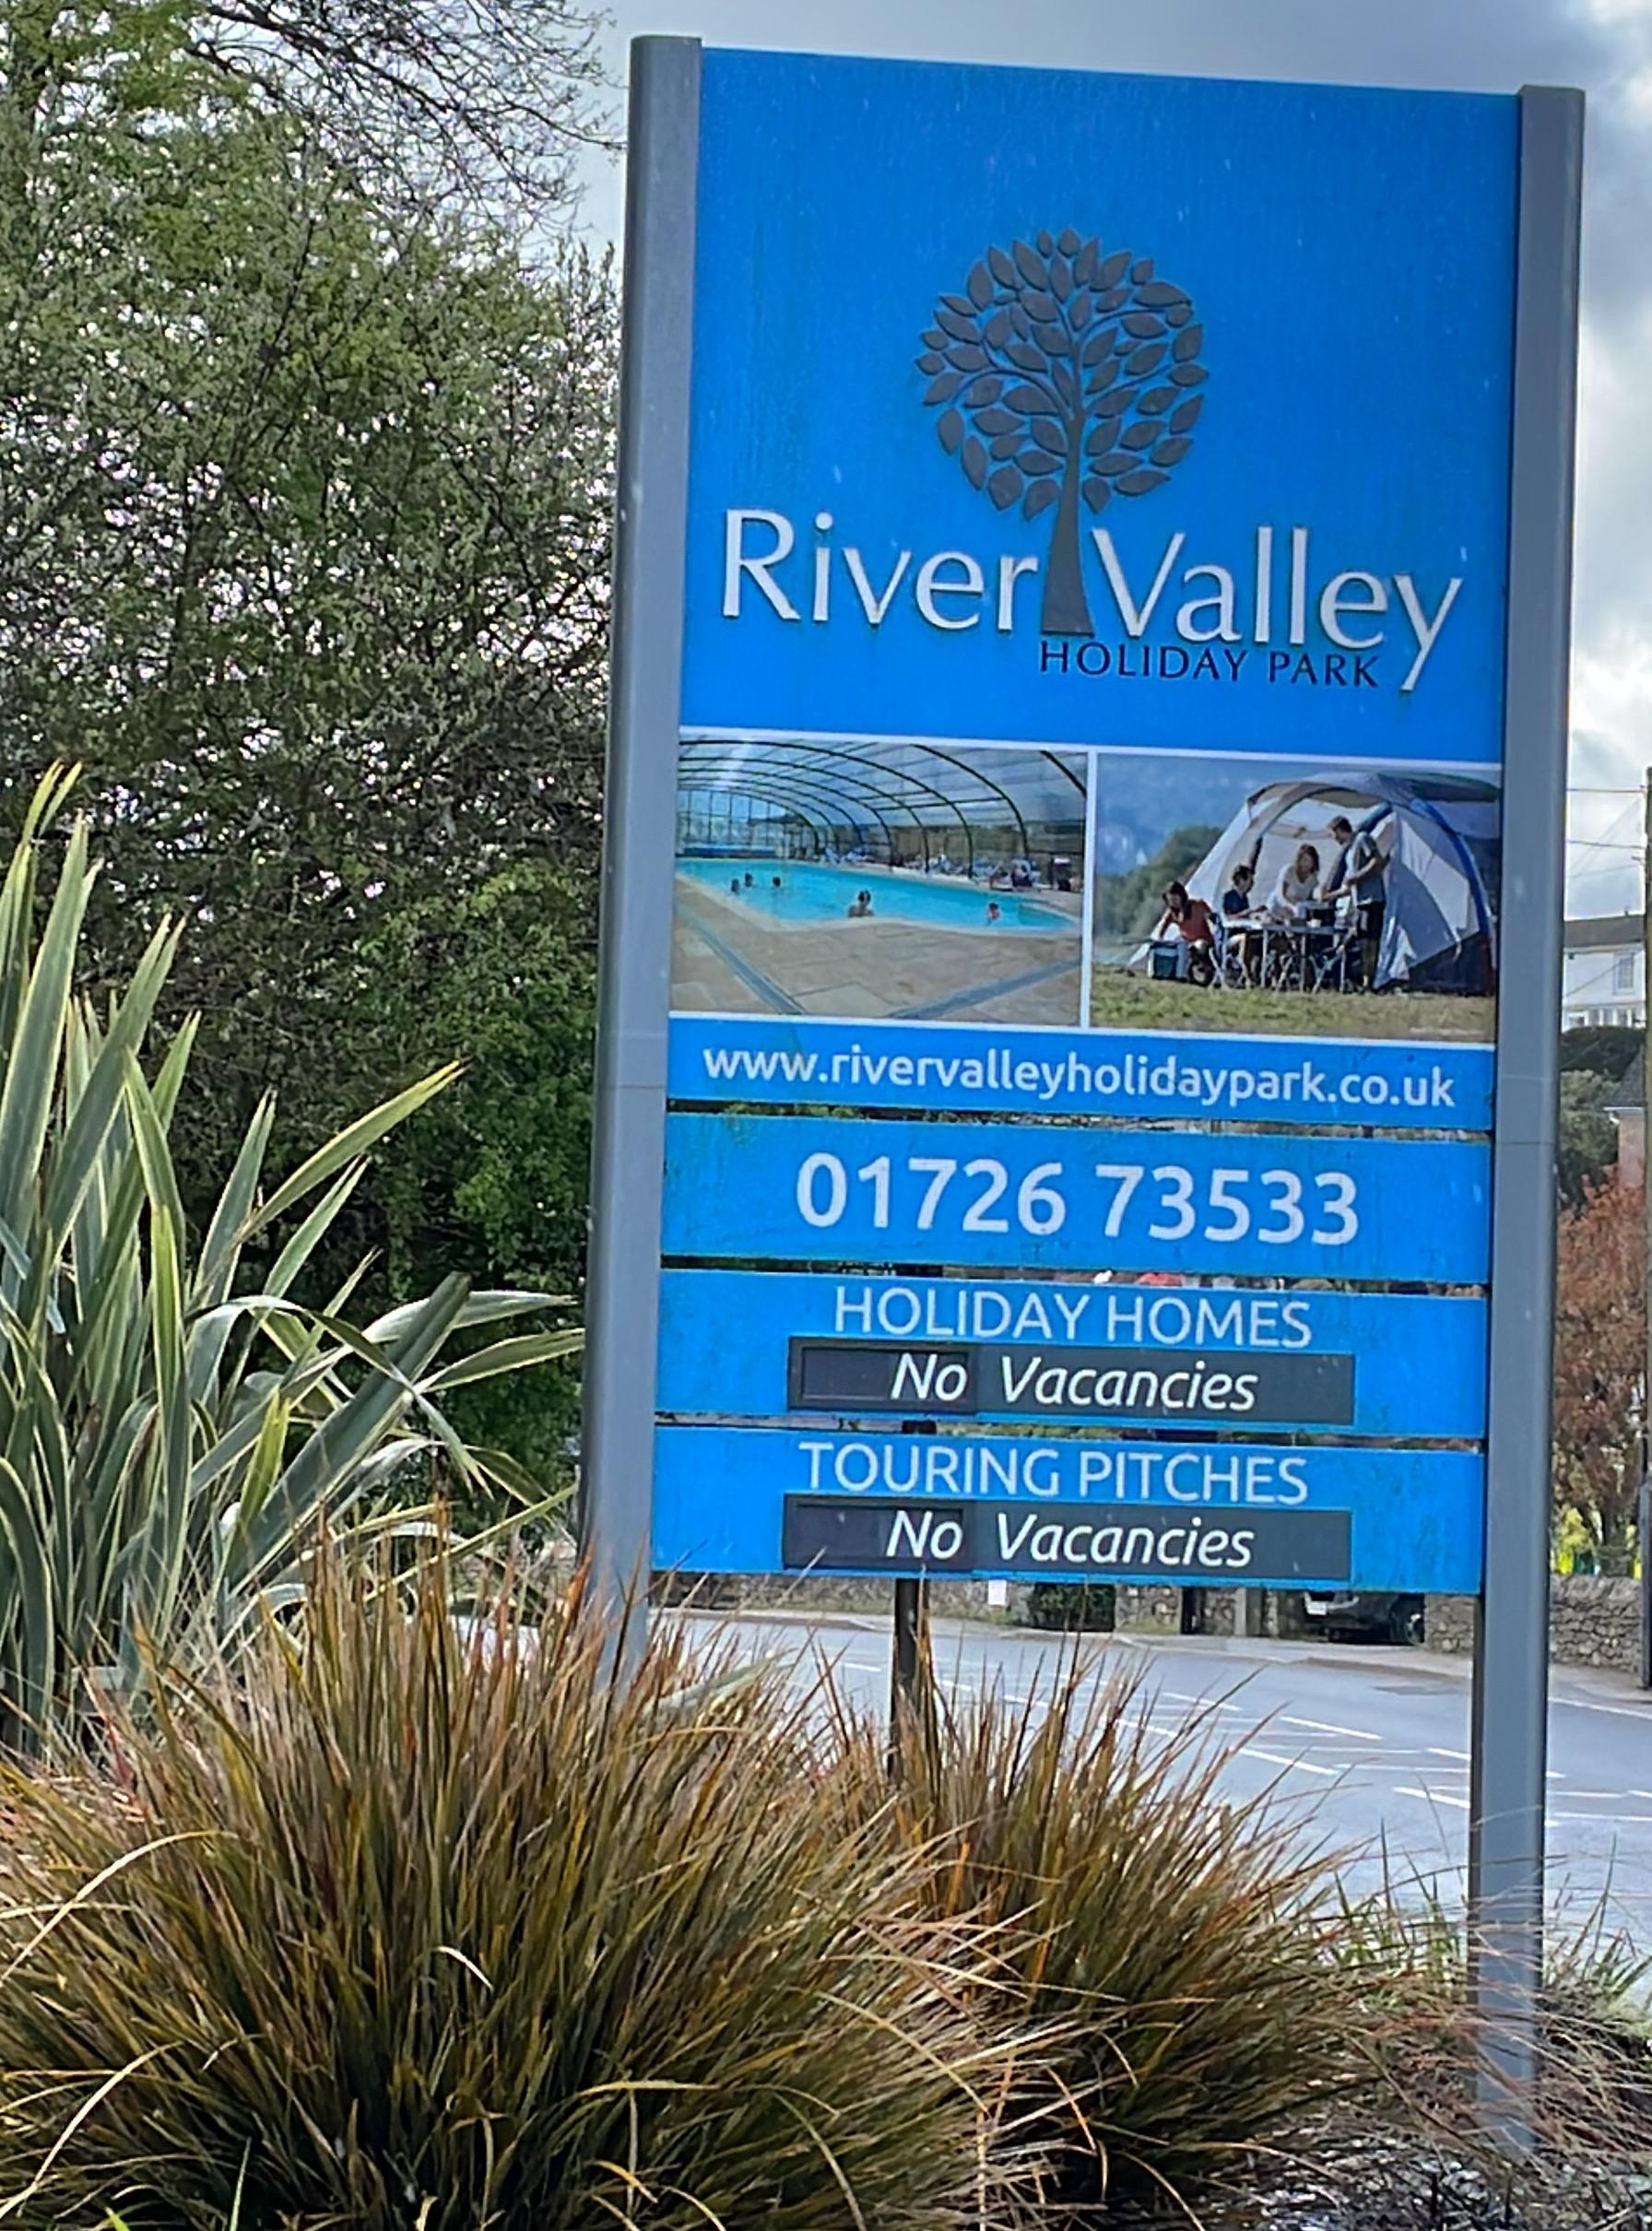 RiverValley Holiday Park